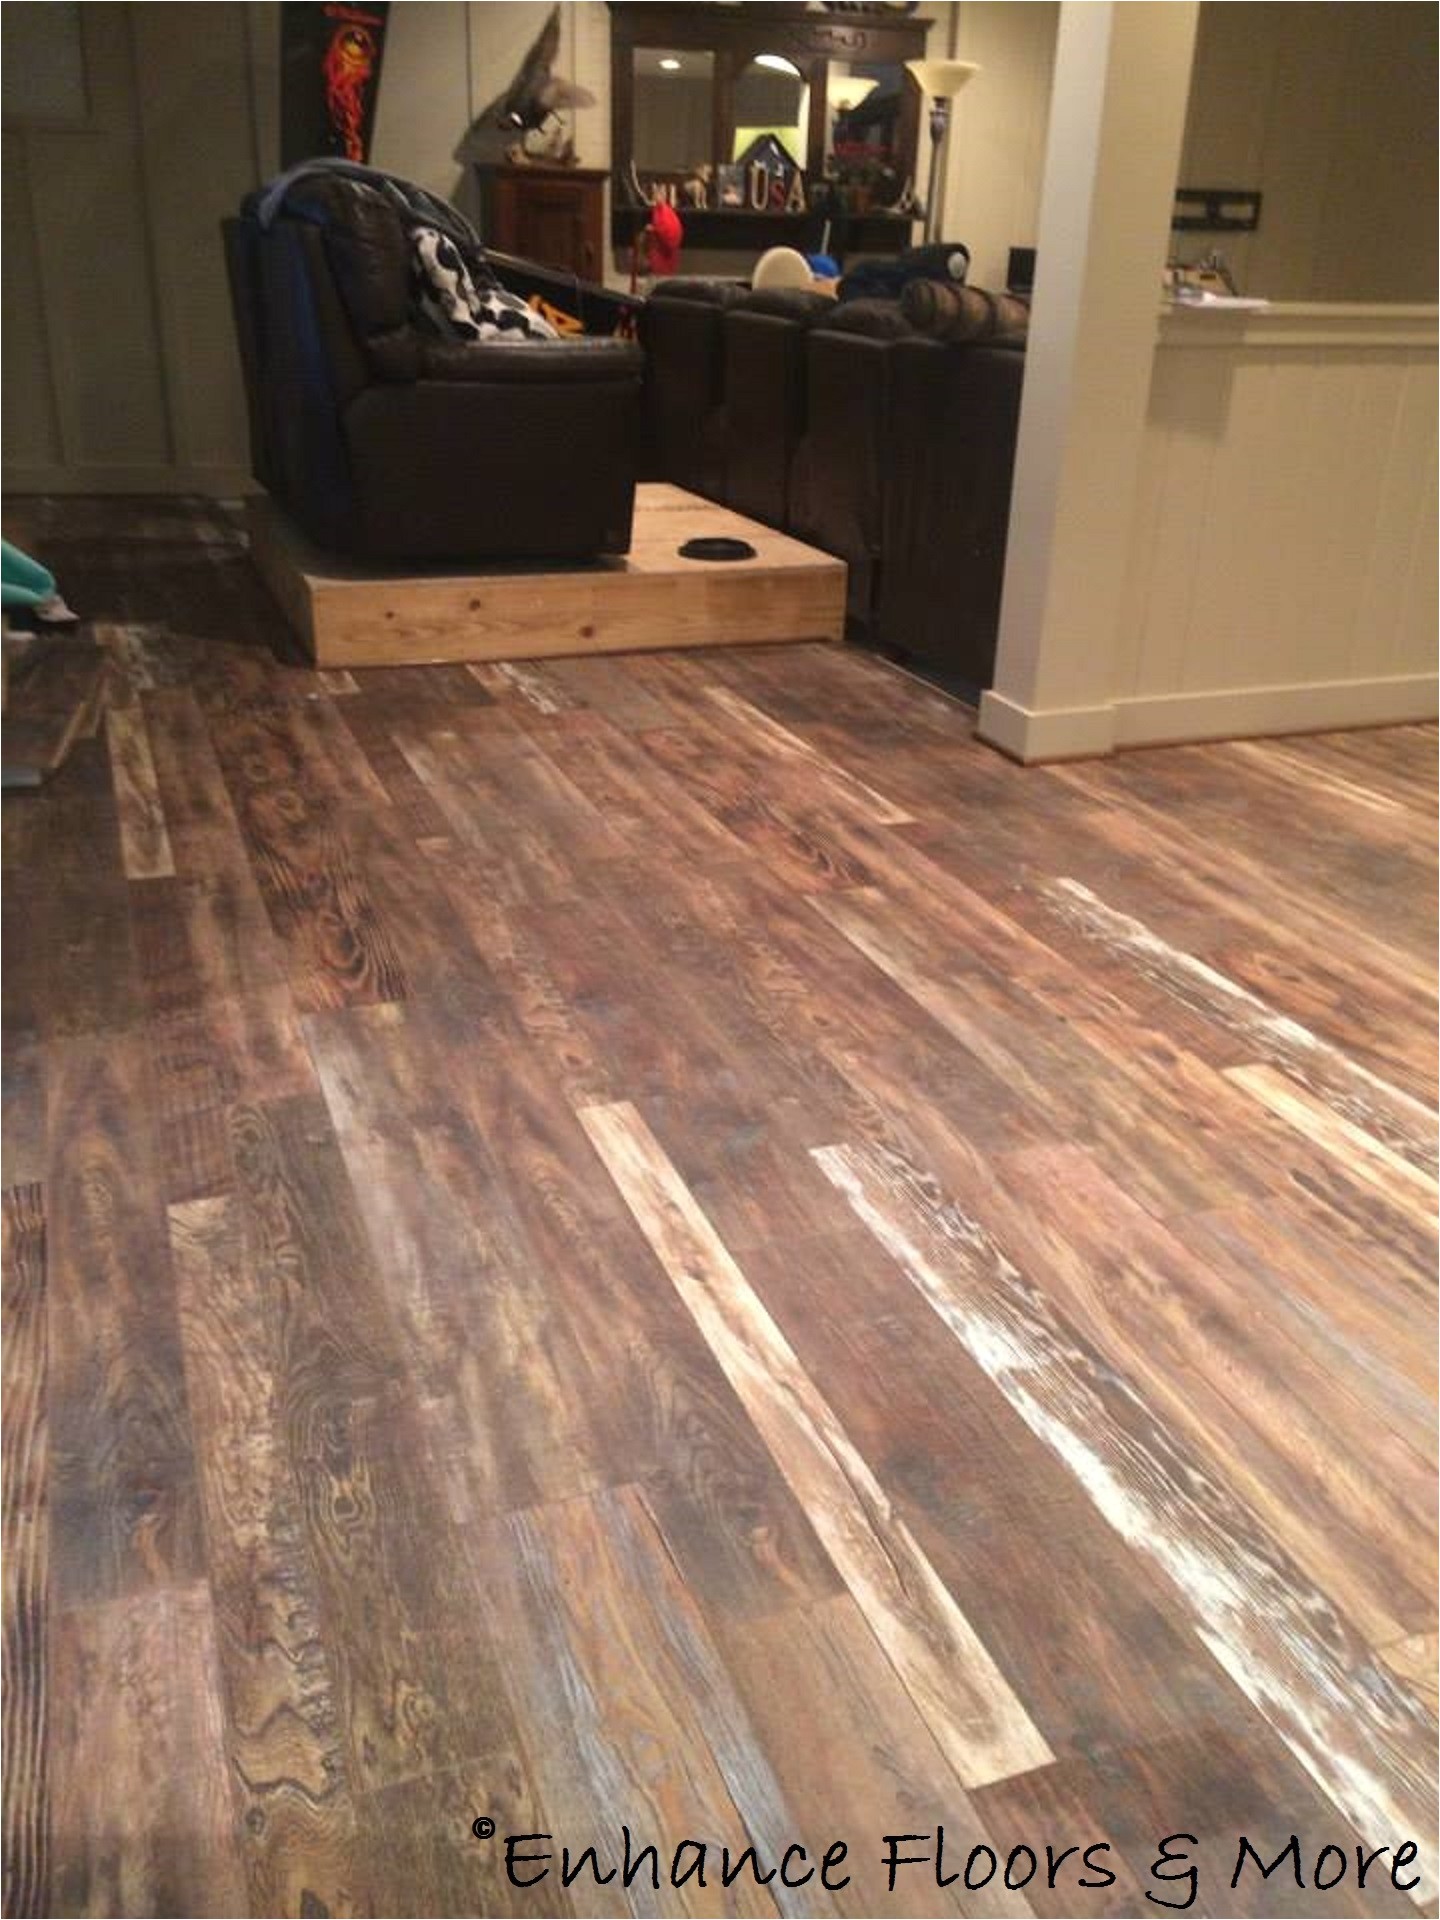 laminate flooring with attached underlayment